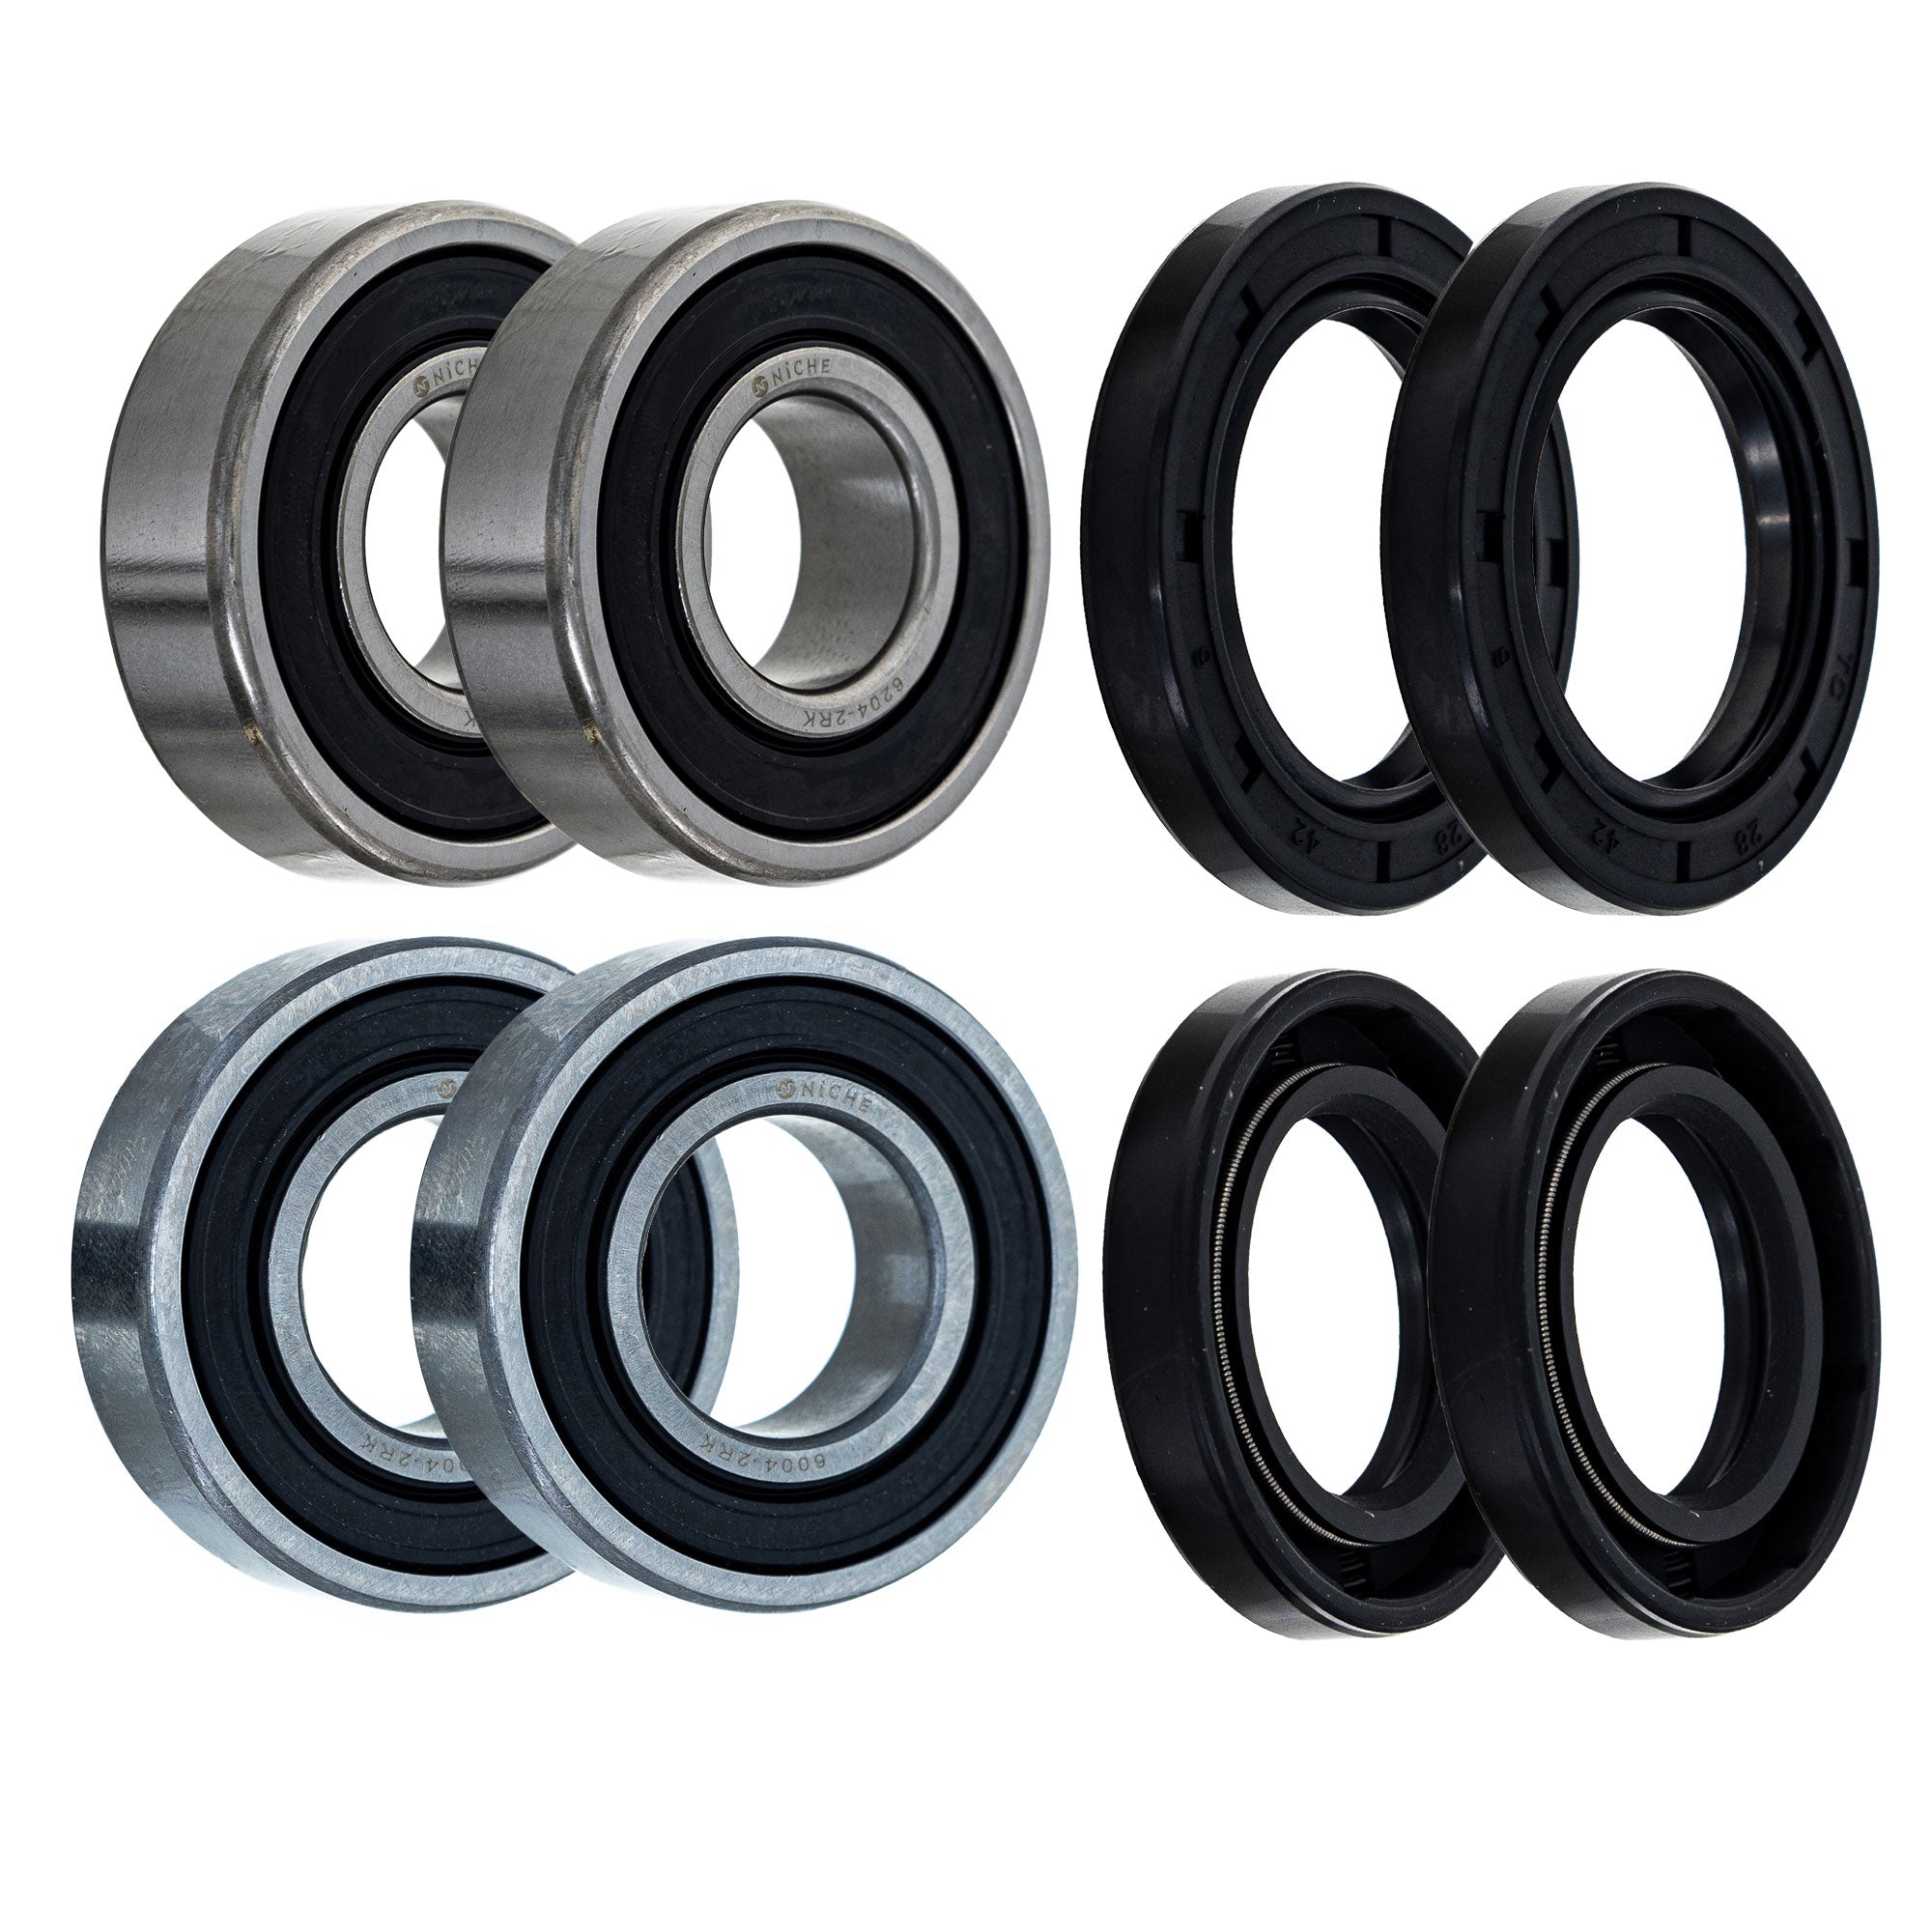 Wheel Bearing Seal Kit for zOTHER Grizzly DS NICHE MK1008241